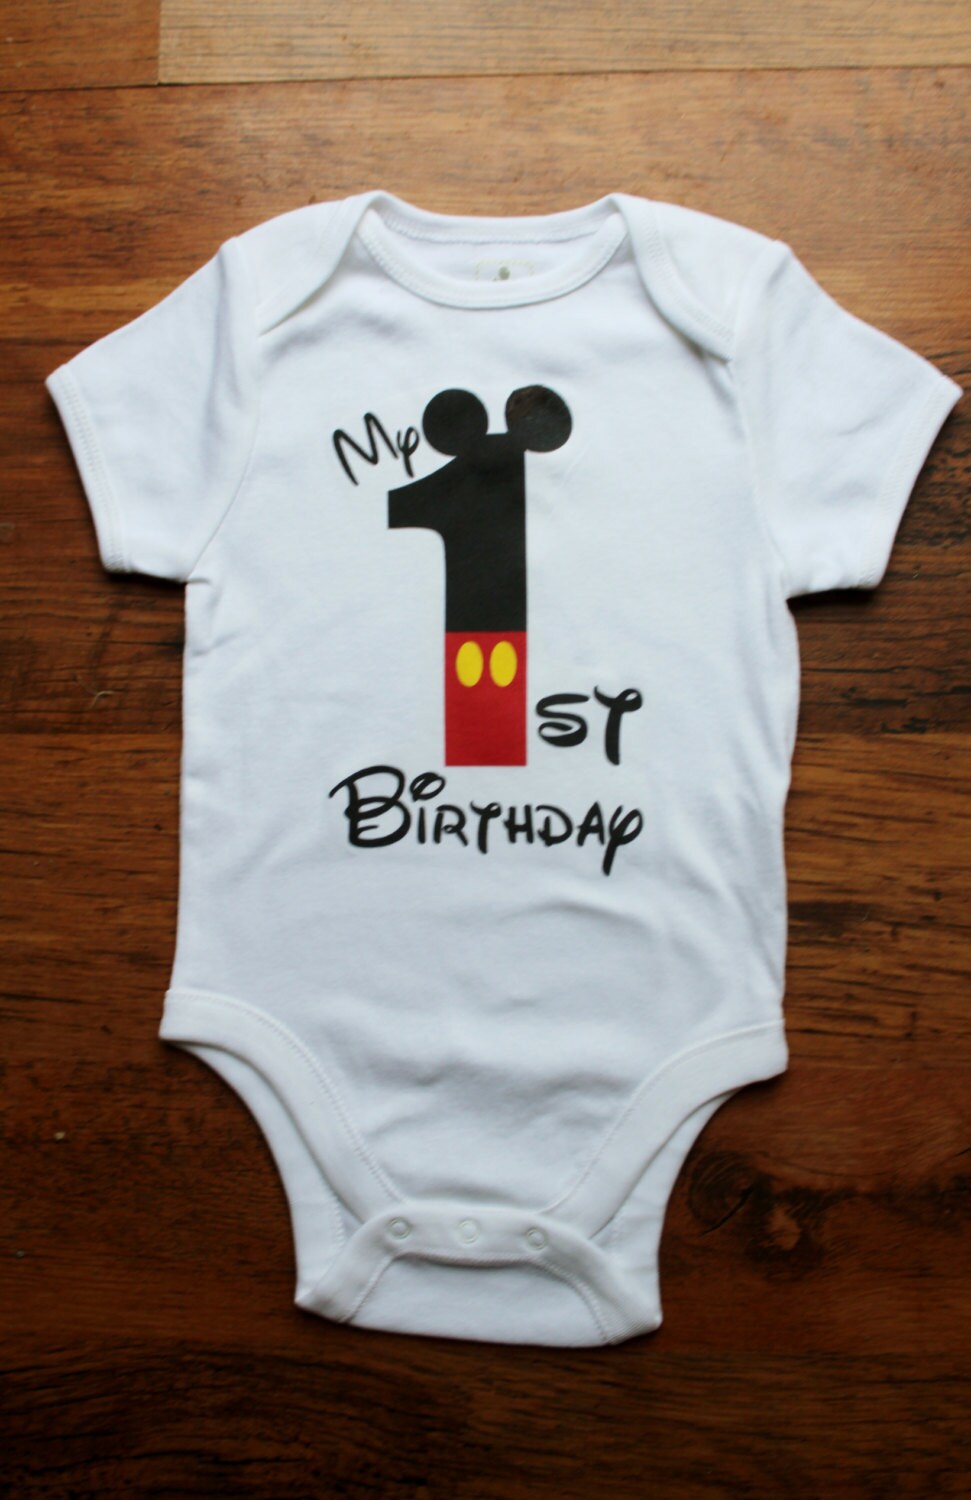 Download My First Birthday Mickey theme by ButtonsandBottoms on Etsy